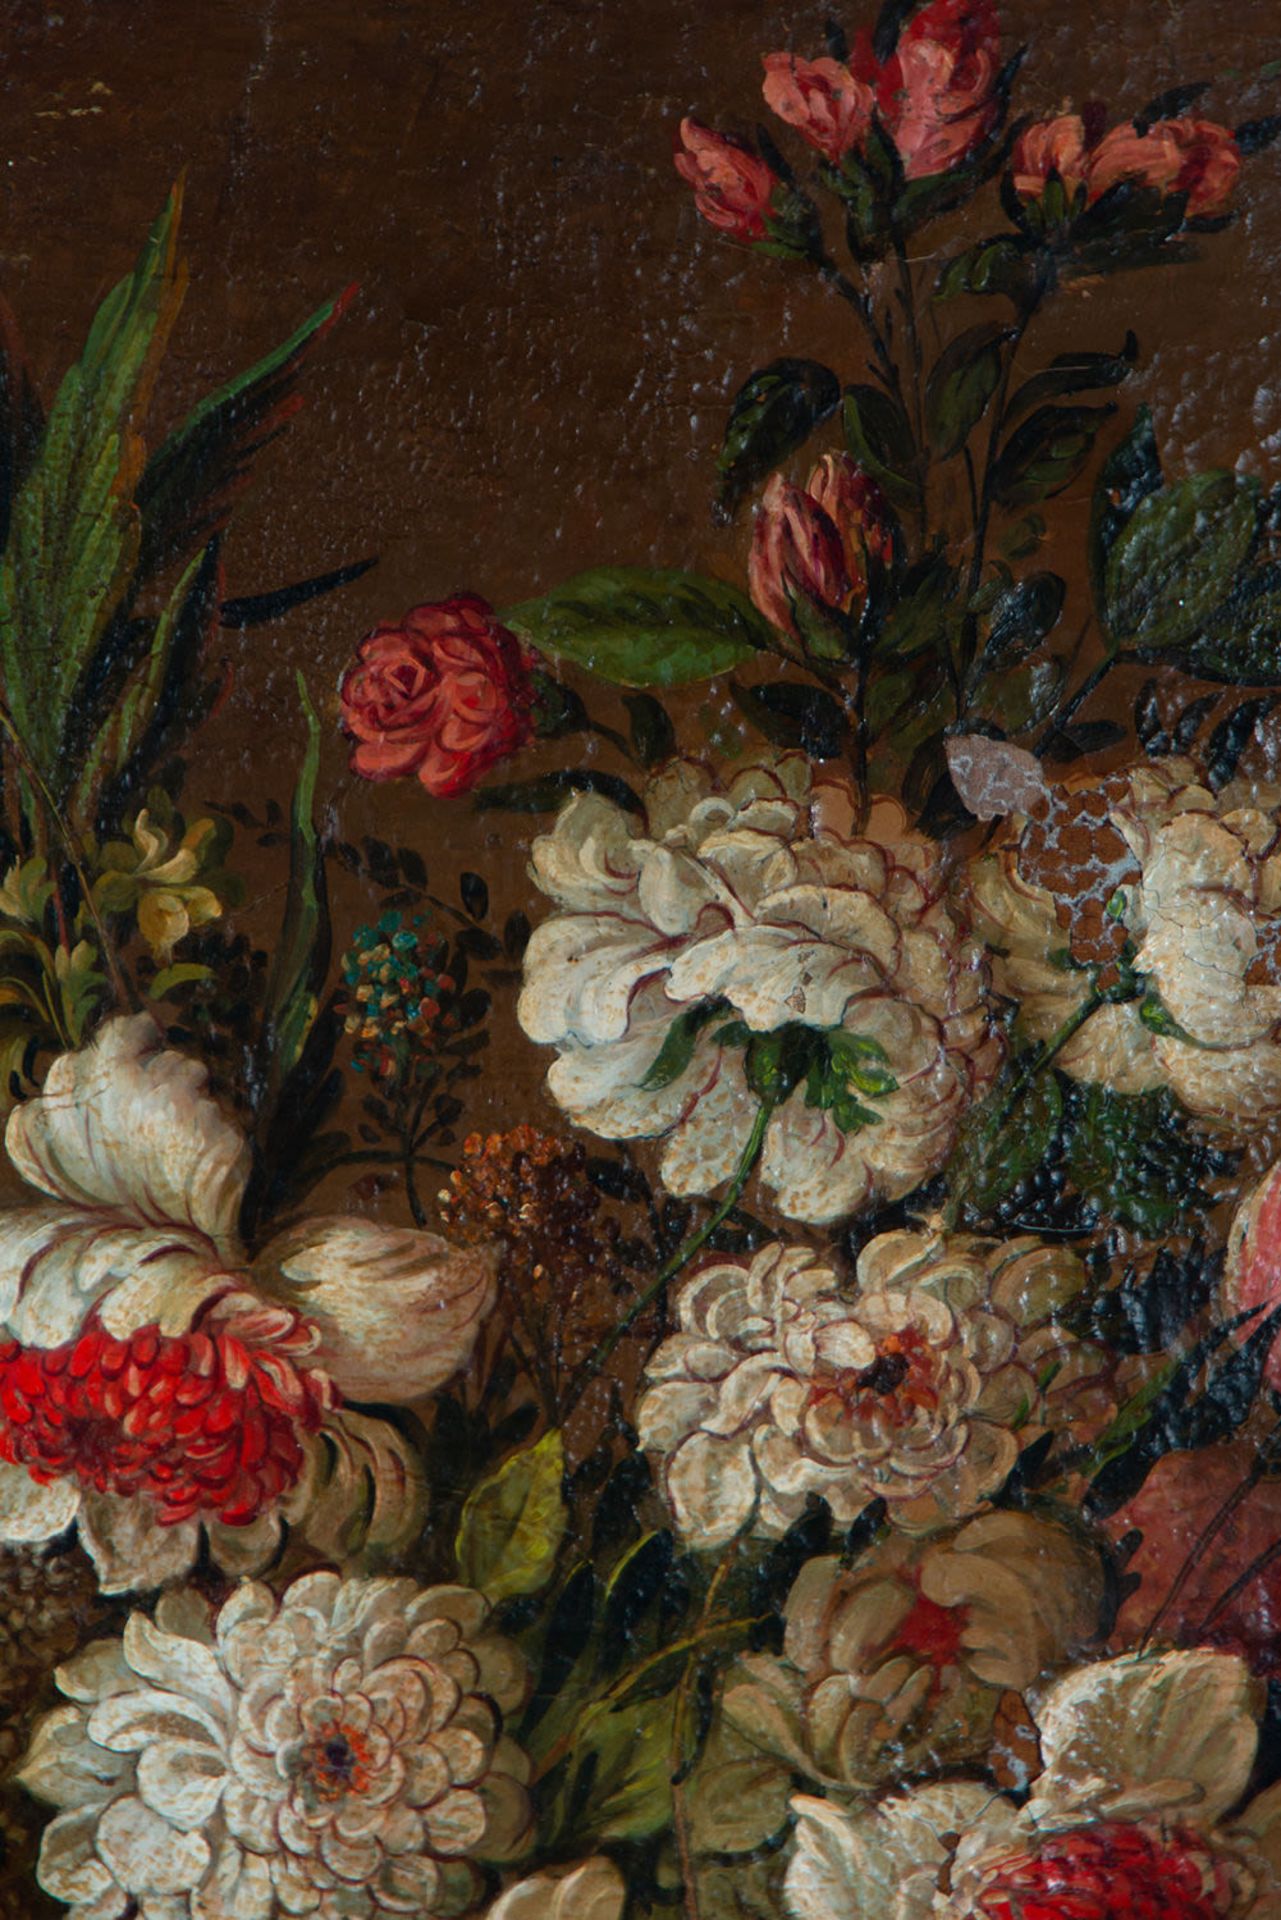 Pair of large still lifes of Flowers, Dutch school of the 17th - 18th century - Image 16 of 20